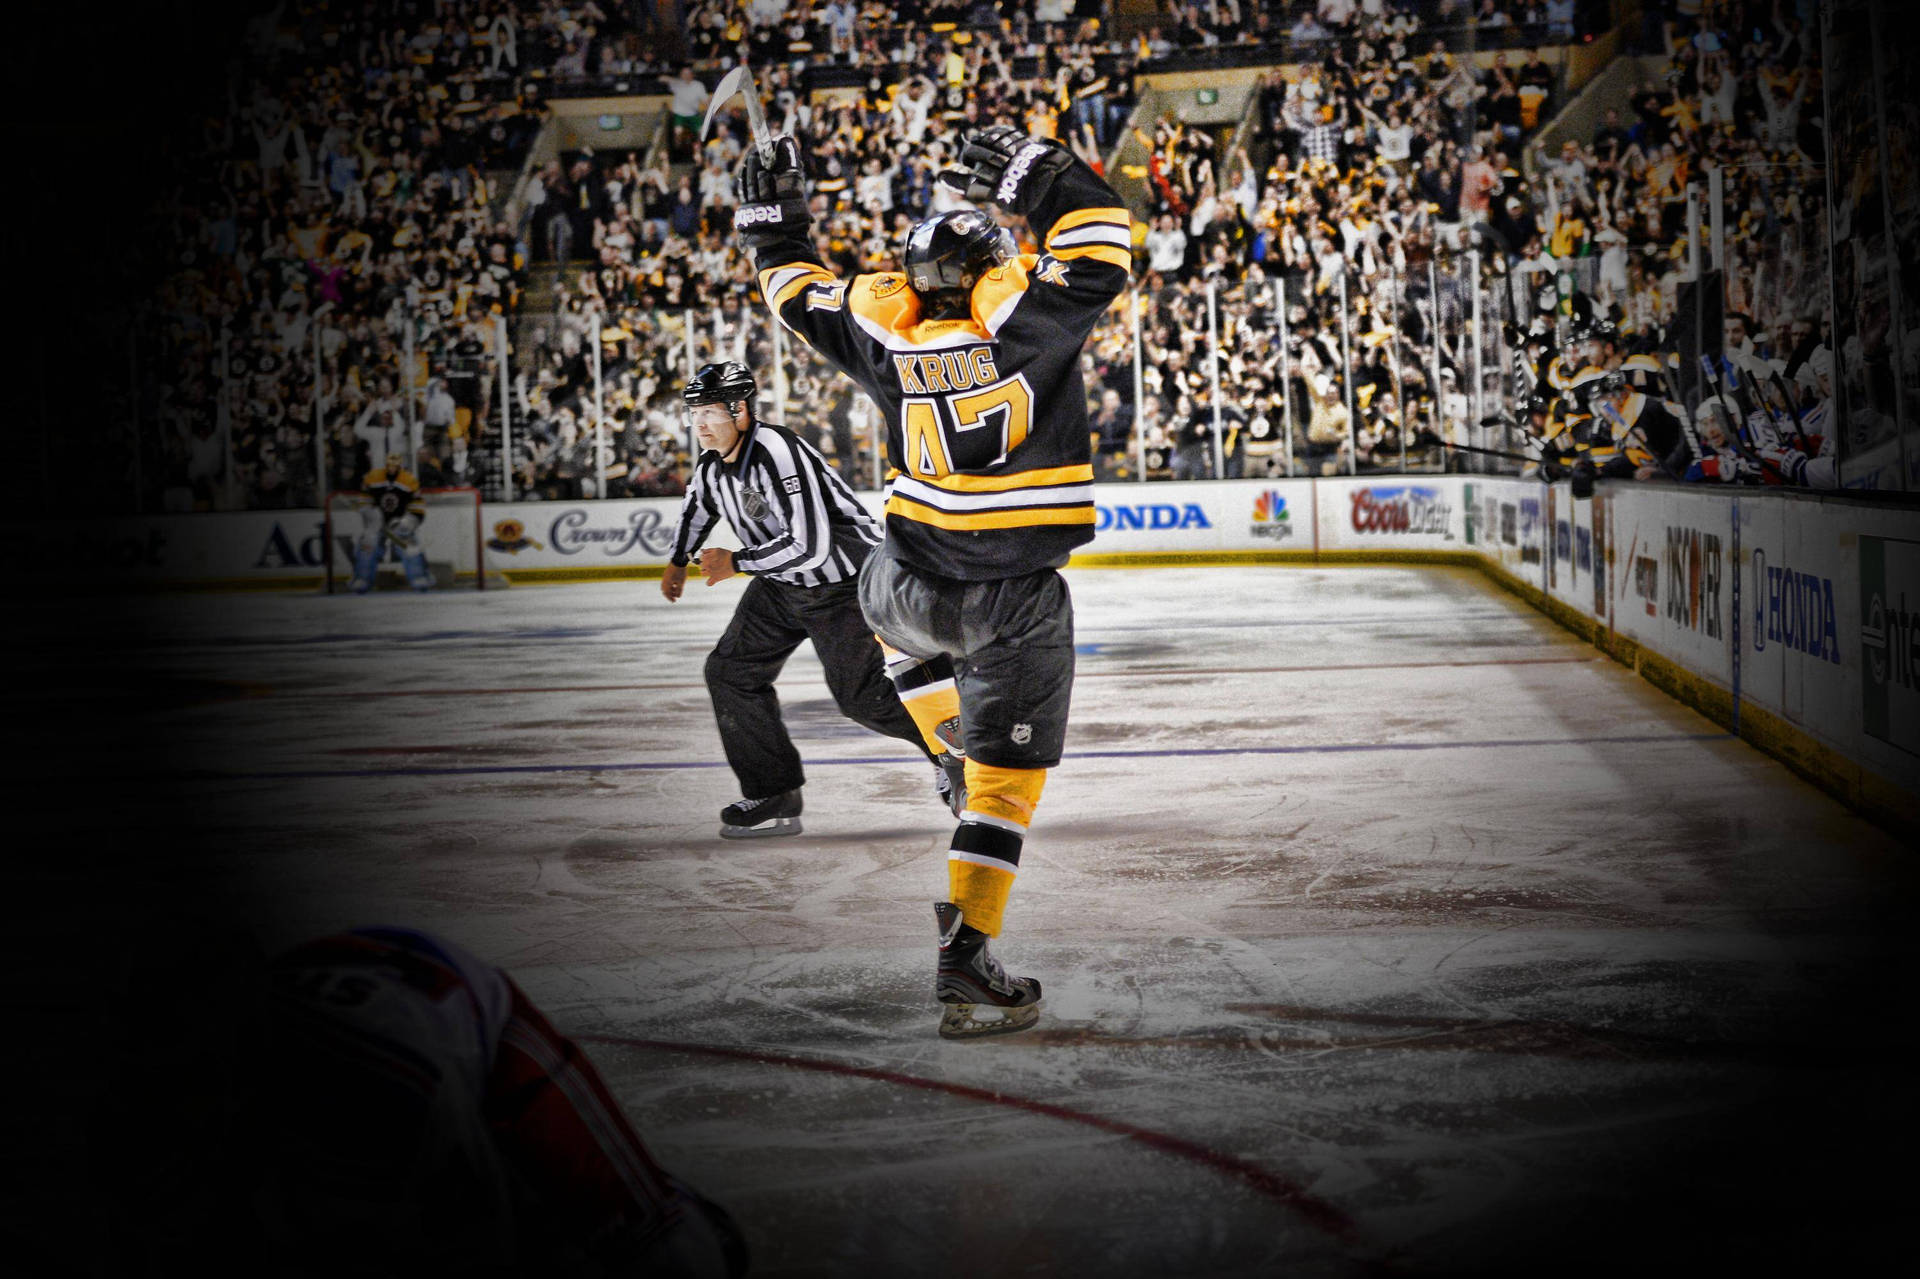 Bruins Player Torey Krug in his First NHL game in October 2013 Wallpaper